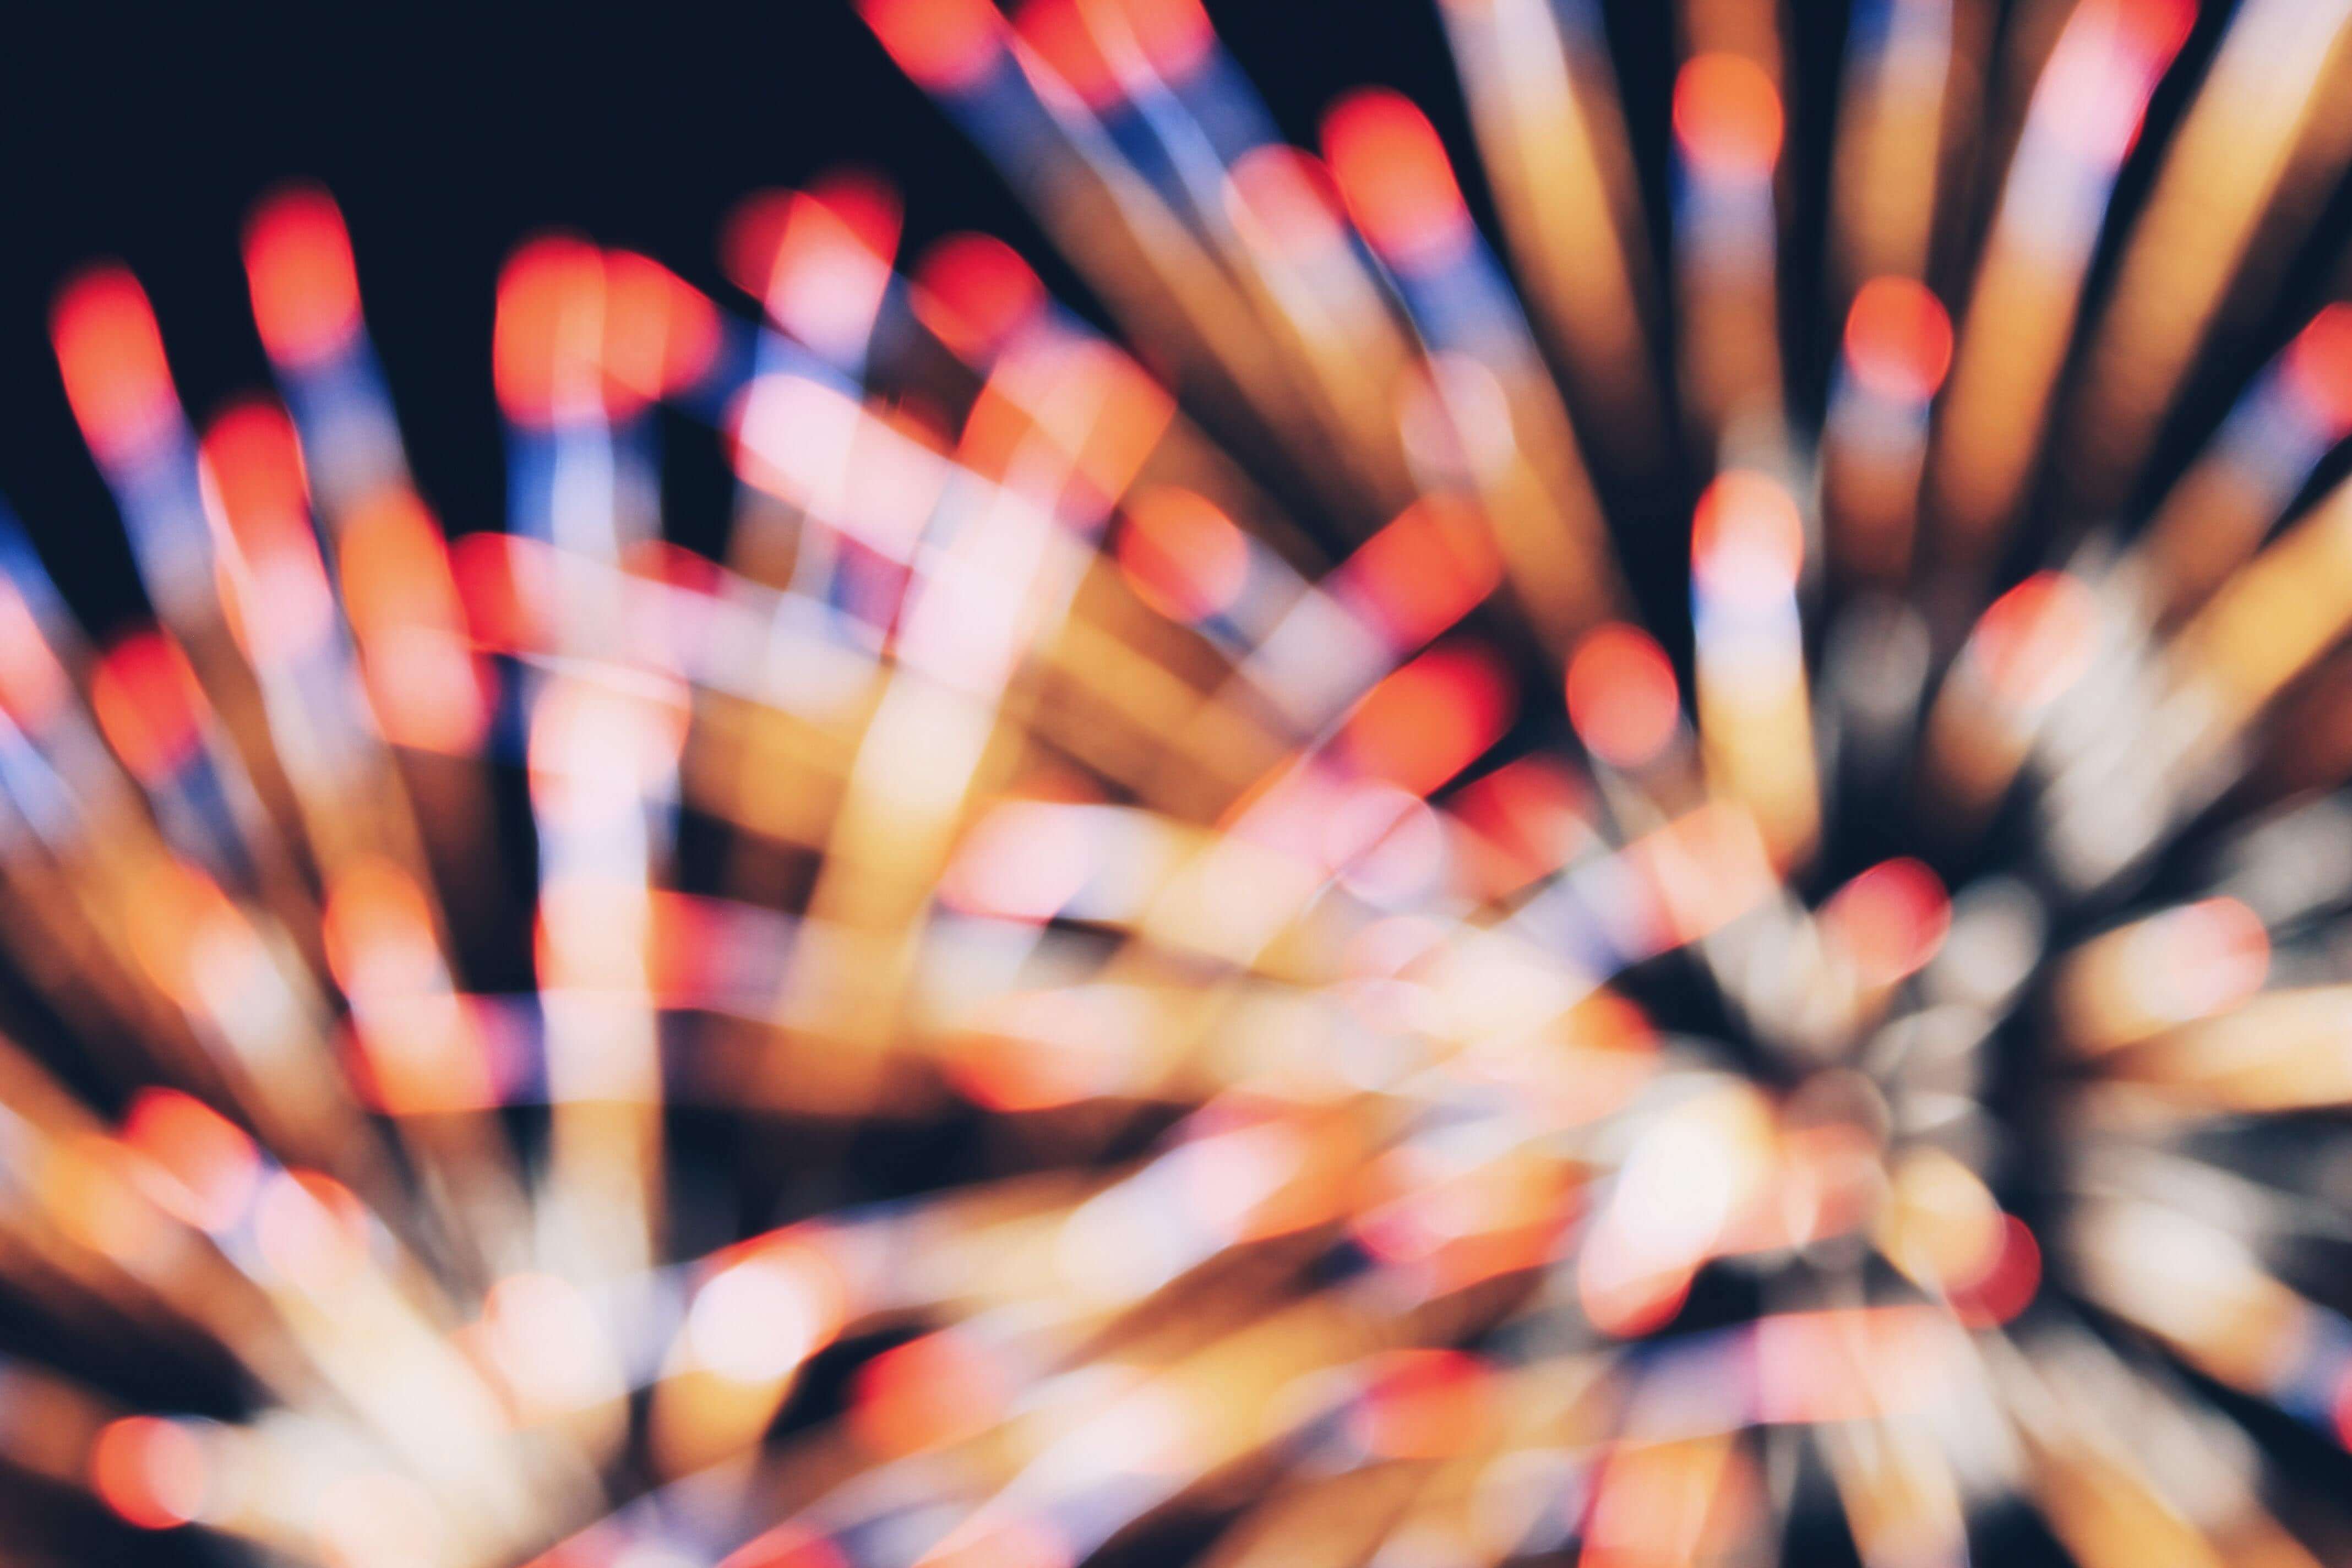 4 Considerations to Ensure Your Fireworks Show Is Safe and Fun